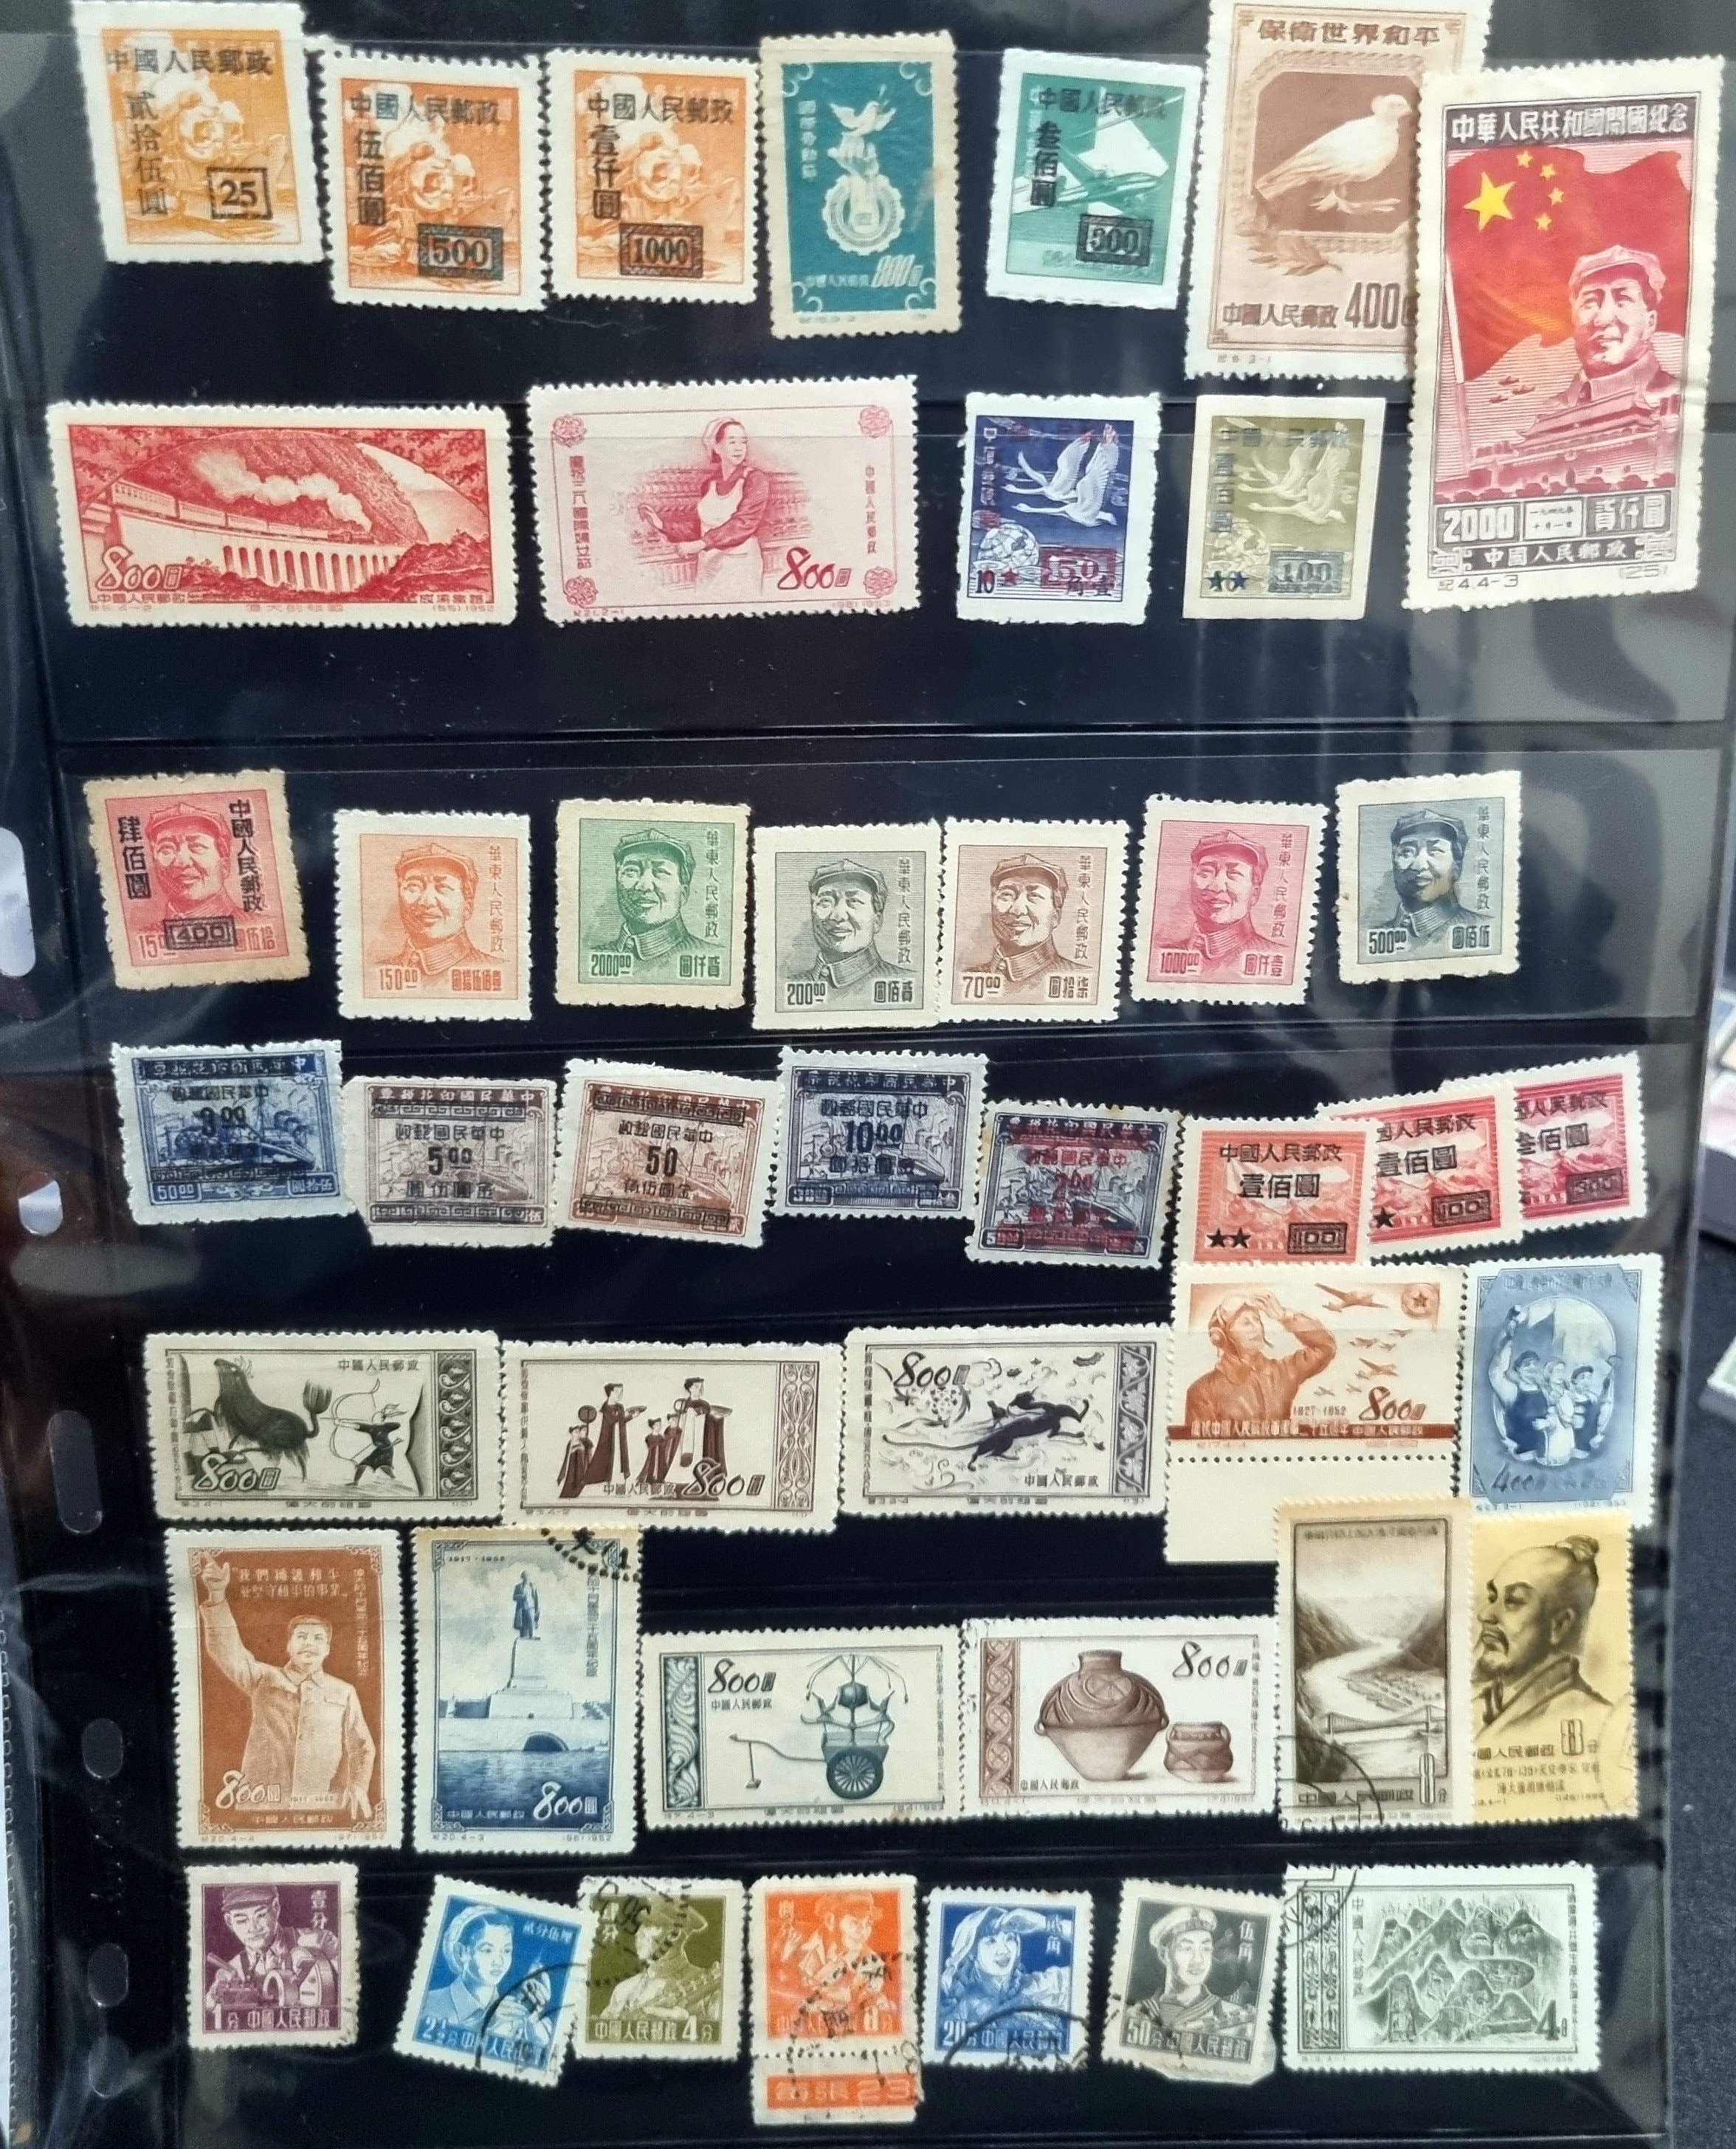 13 Diff ARCHITECTURE Famous Architects & Buildings Postage stamps Free  Shipping! Your #1 source with the best prices on Vintage stamps